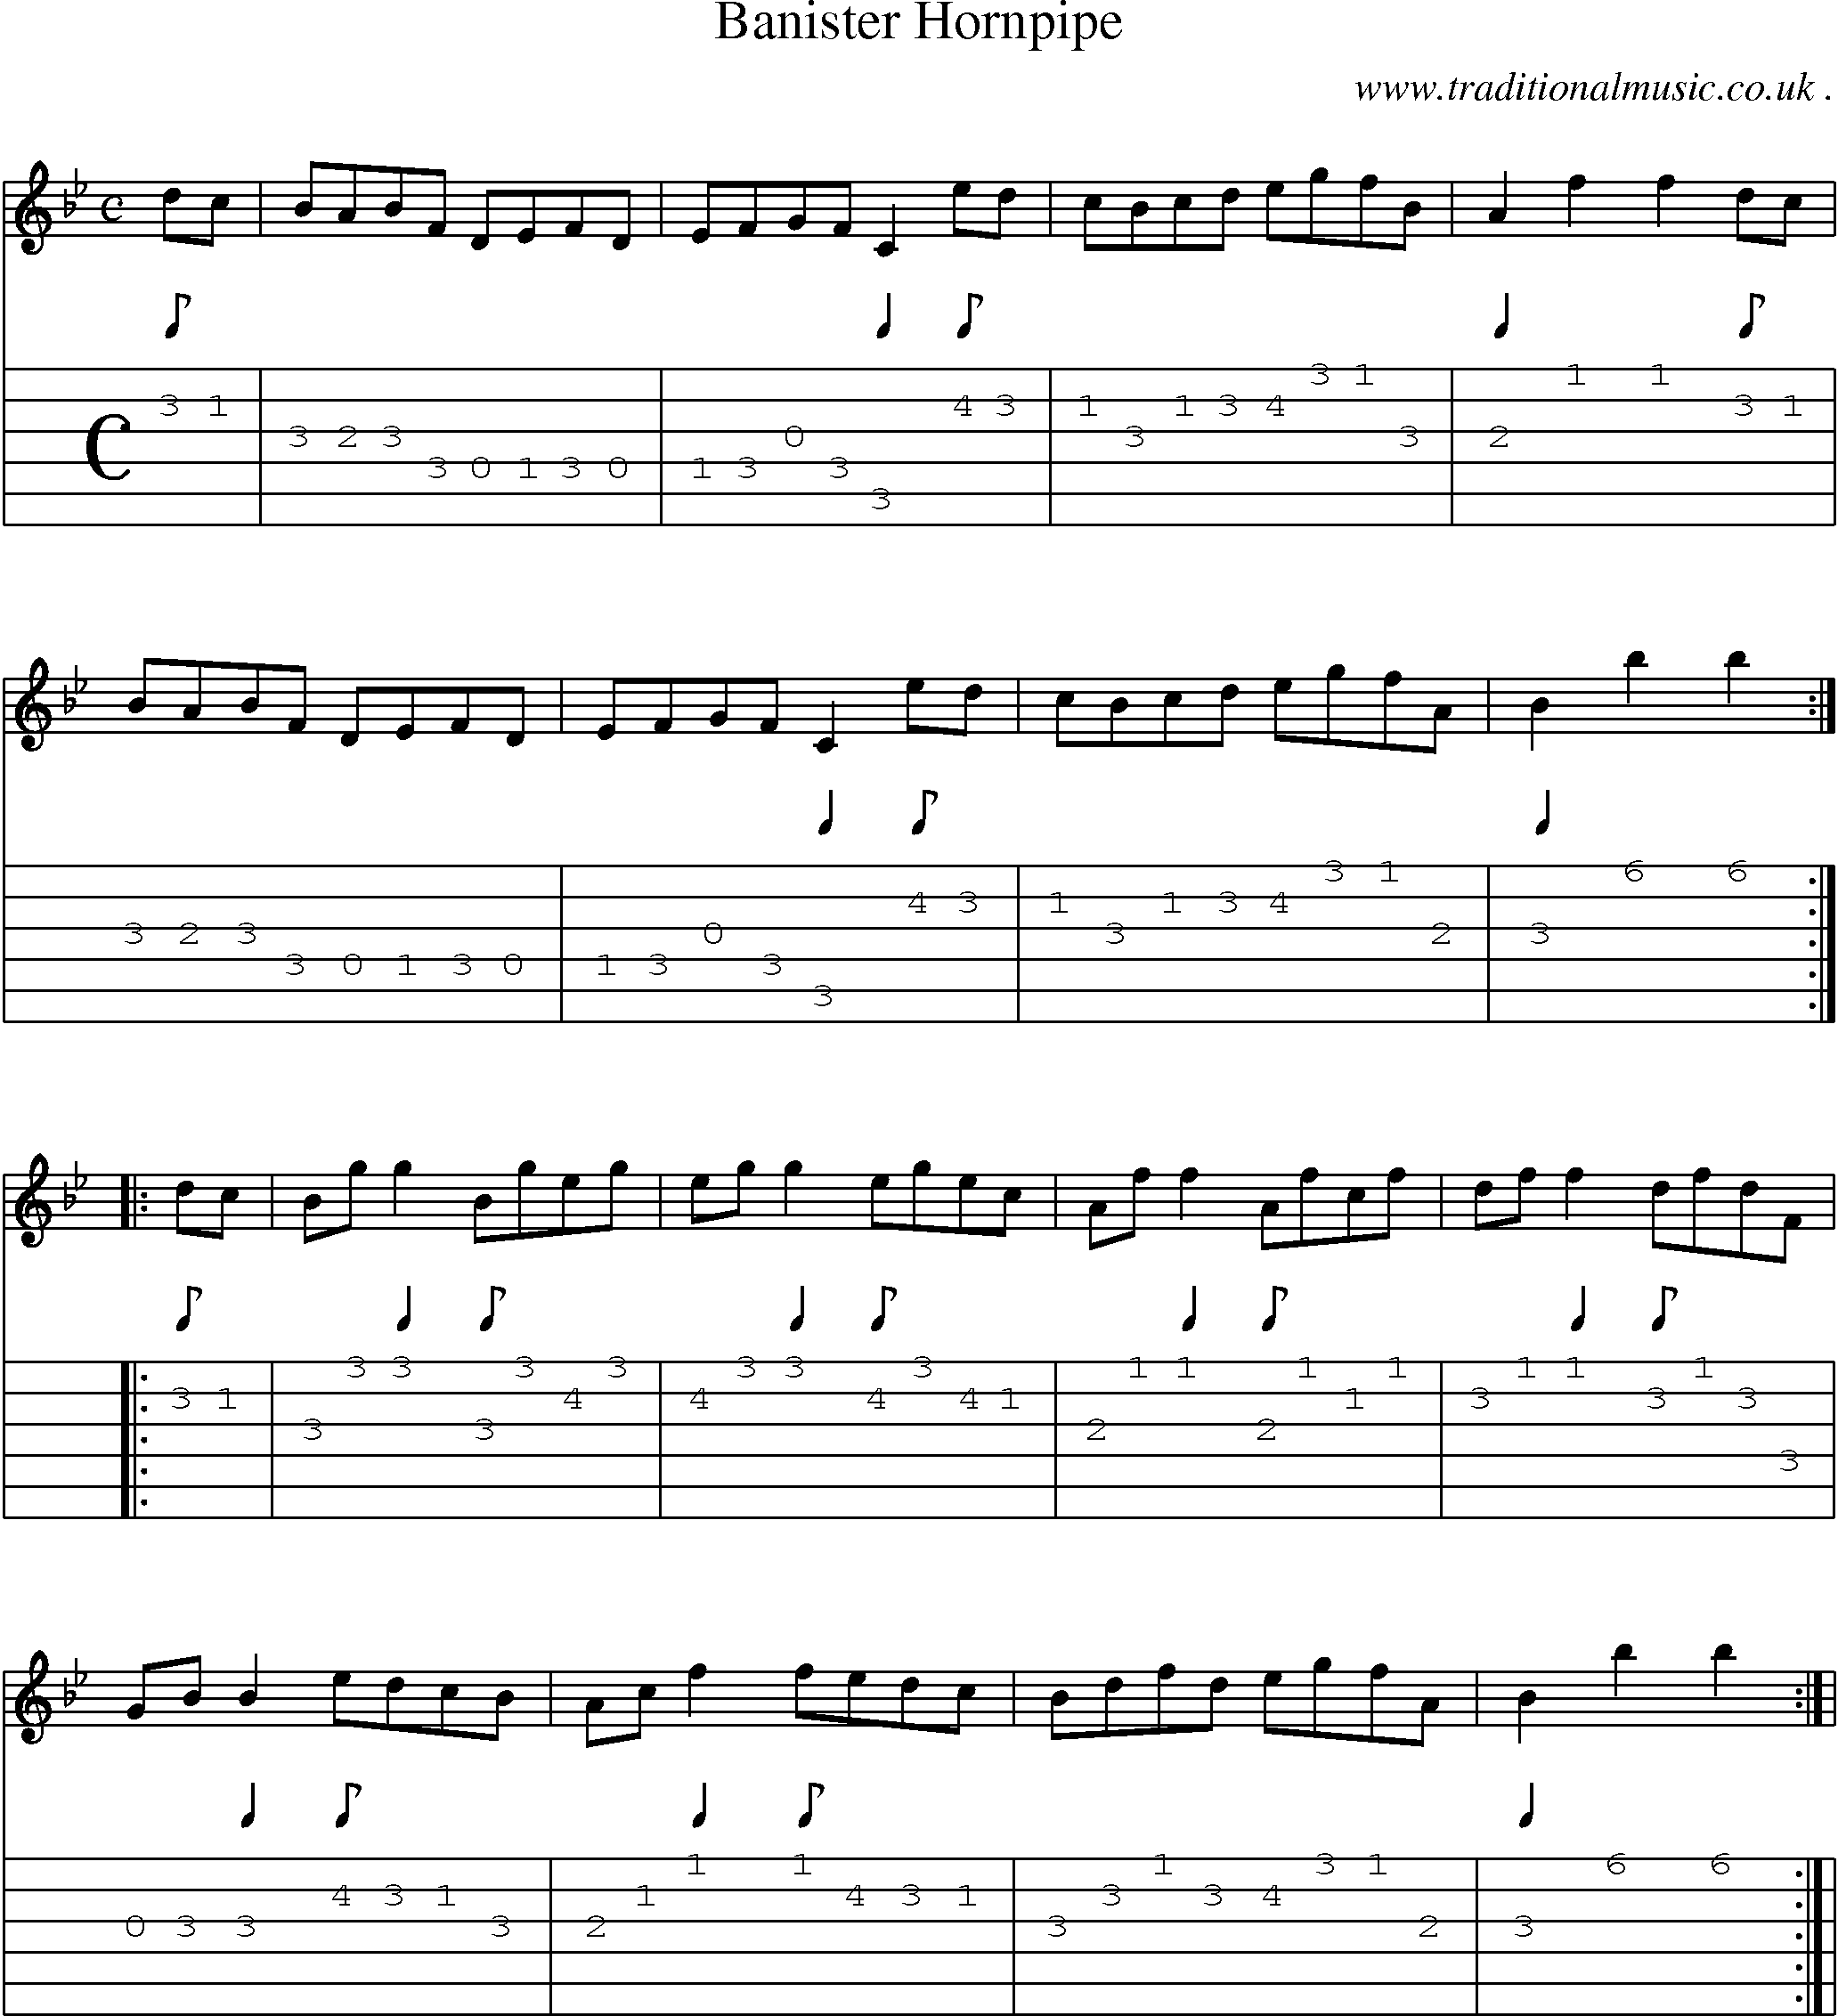 Sheet-Music and Guitar Tabs for Banister Hornpipe